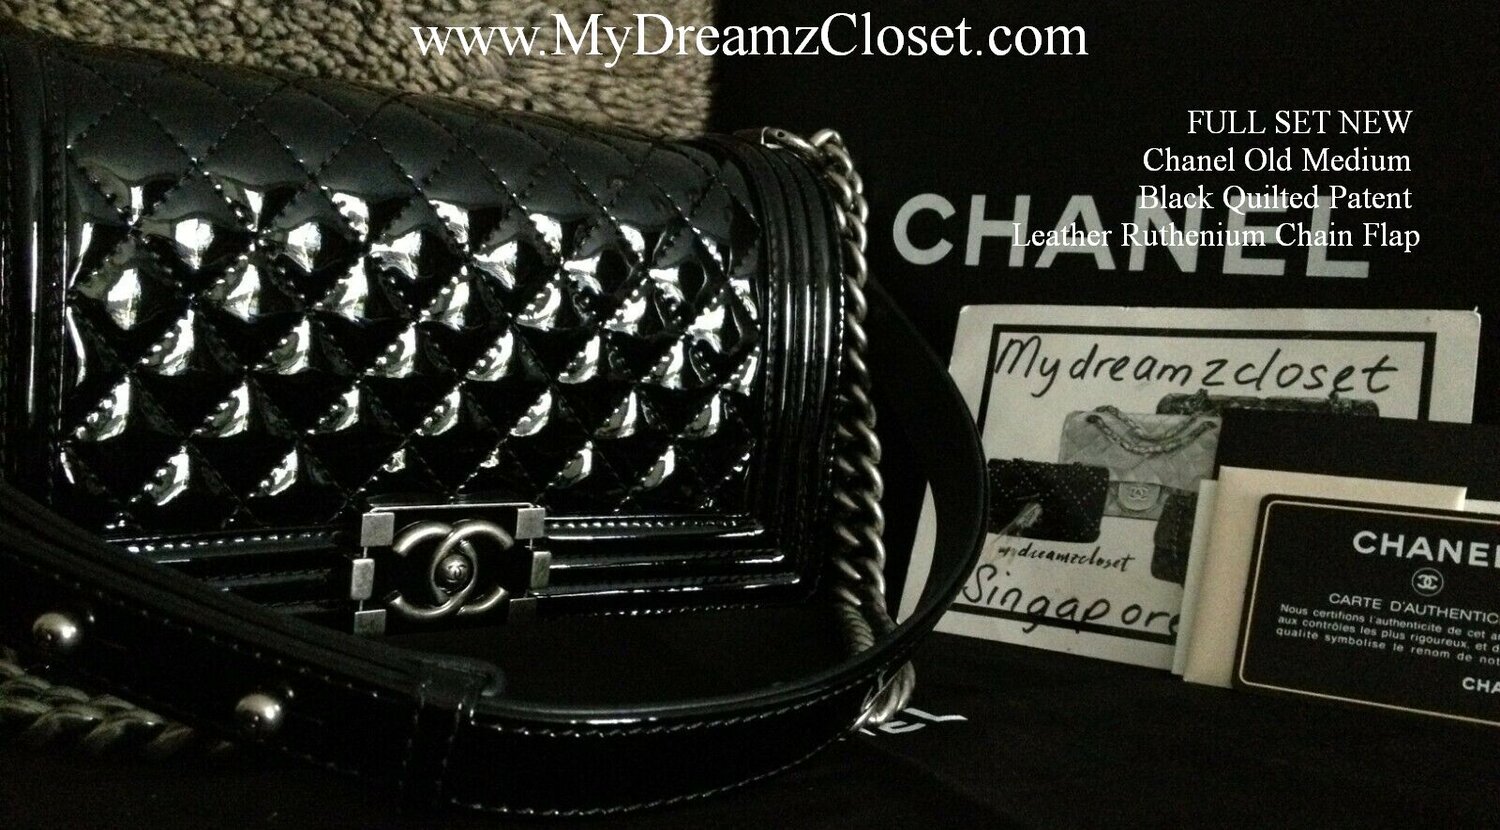 Chanel Red Lambskin Small 8' Classic Flap Bag Ruthenium Hardware MW195 –  LuxuryPromise